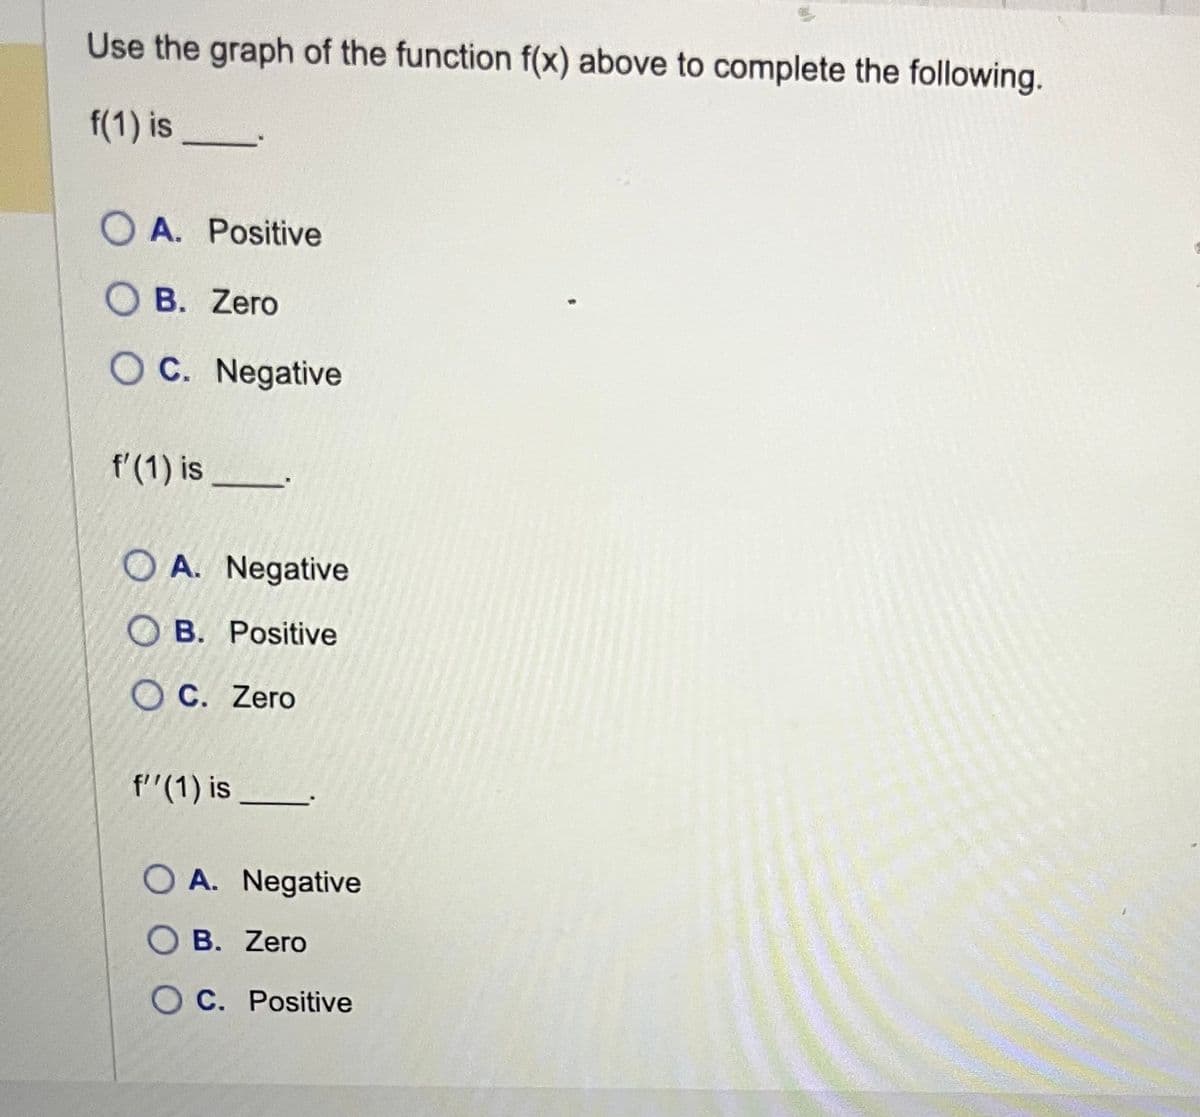 Use the graph of the function f(x) above to complete the following.
f(1) is
OA. Positive
OB. Zero
OC. Negative
f'(1) is
OA. Negative
OB. Positive
OC. Zero
f''(1) is
OA. Negative
B. Zero
OC. Positive